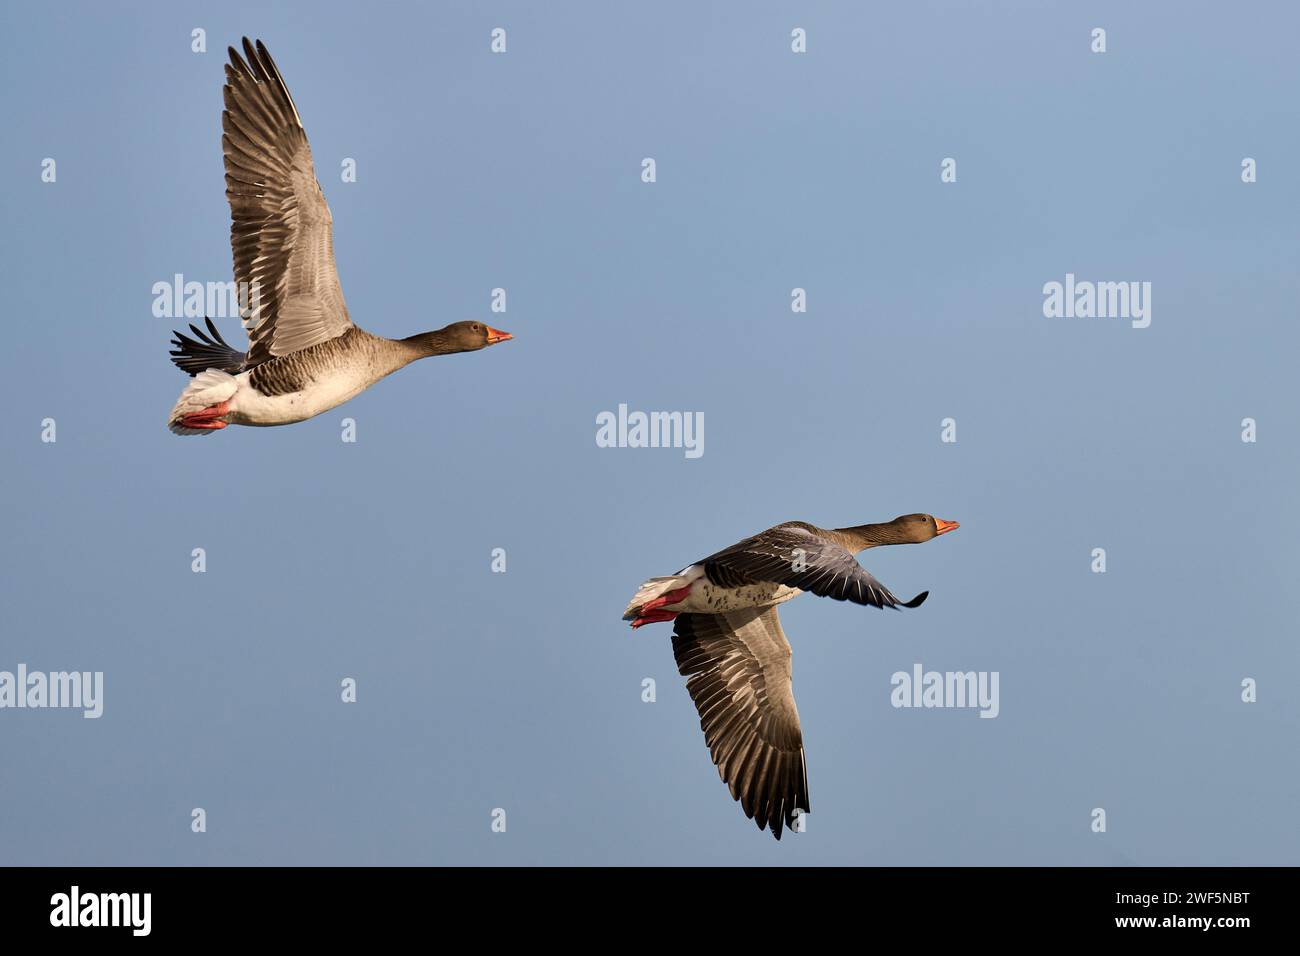 Greylag Geese in flight at the Arundel Wetlands Stock Photo